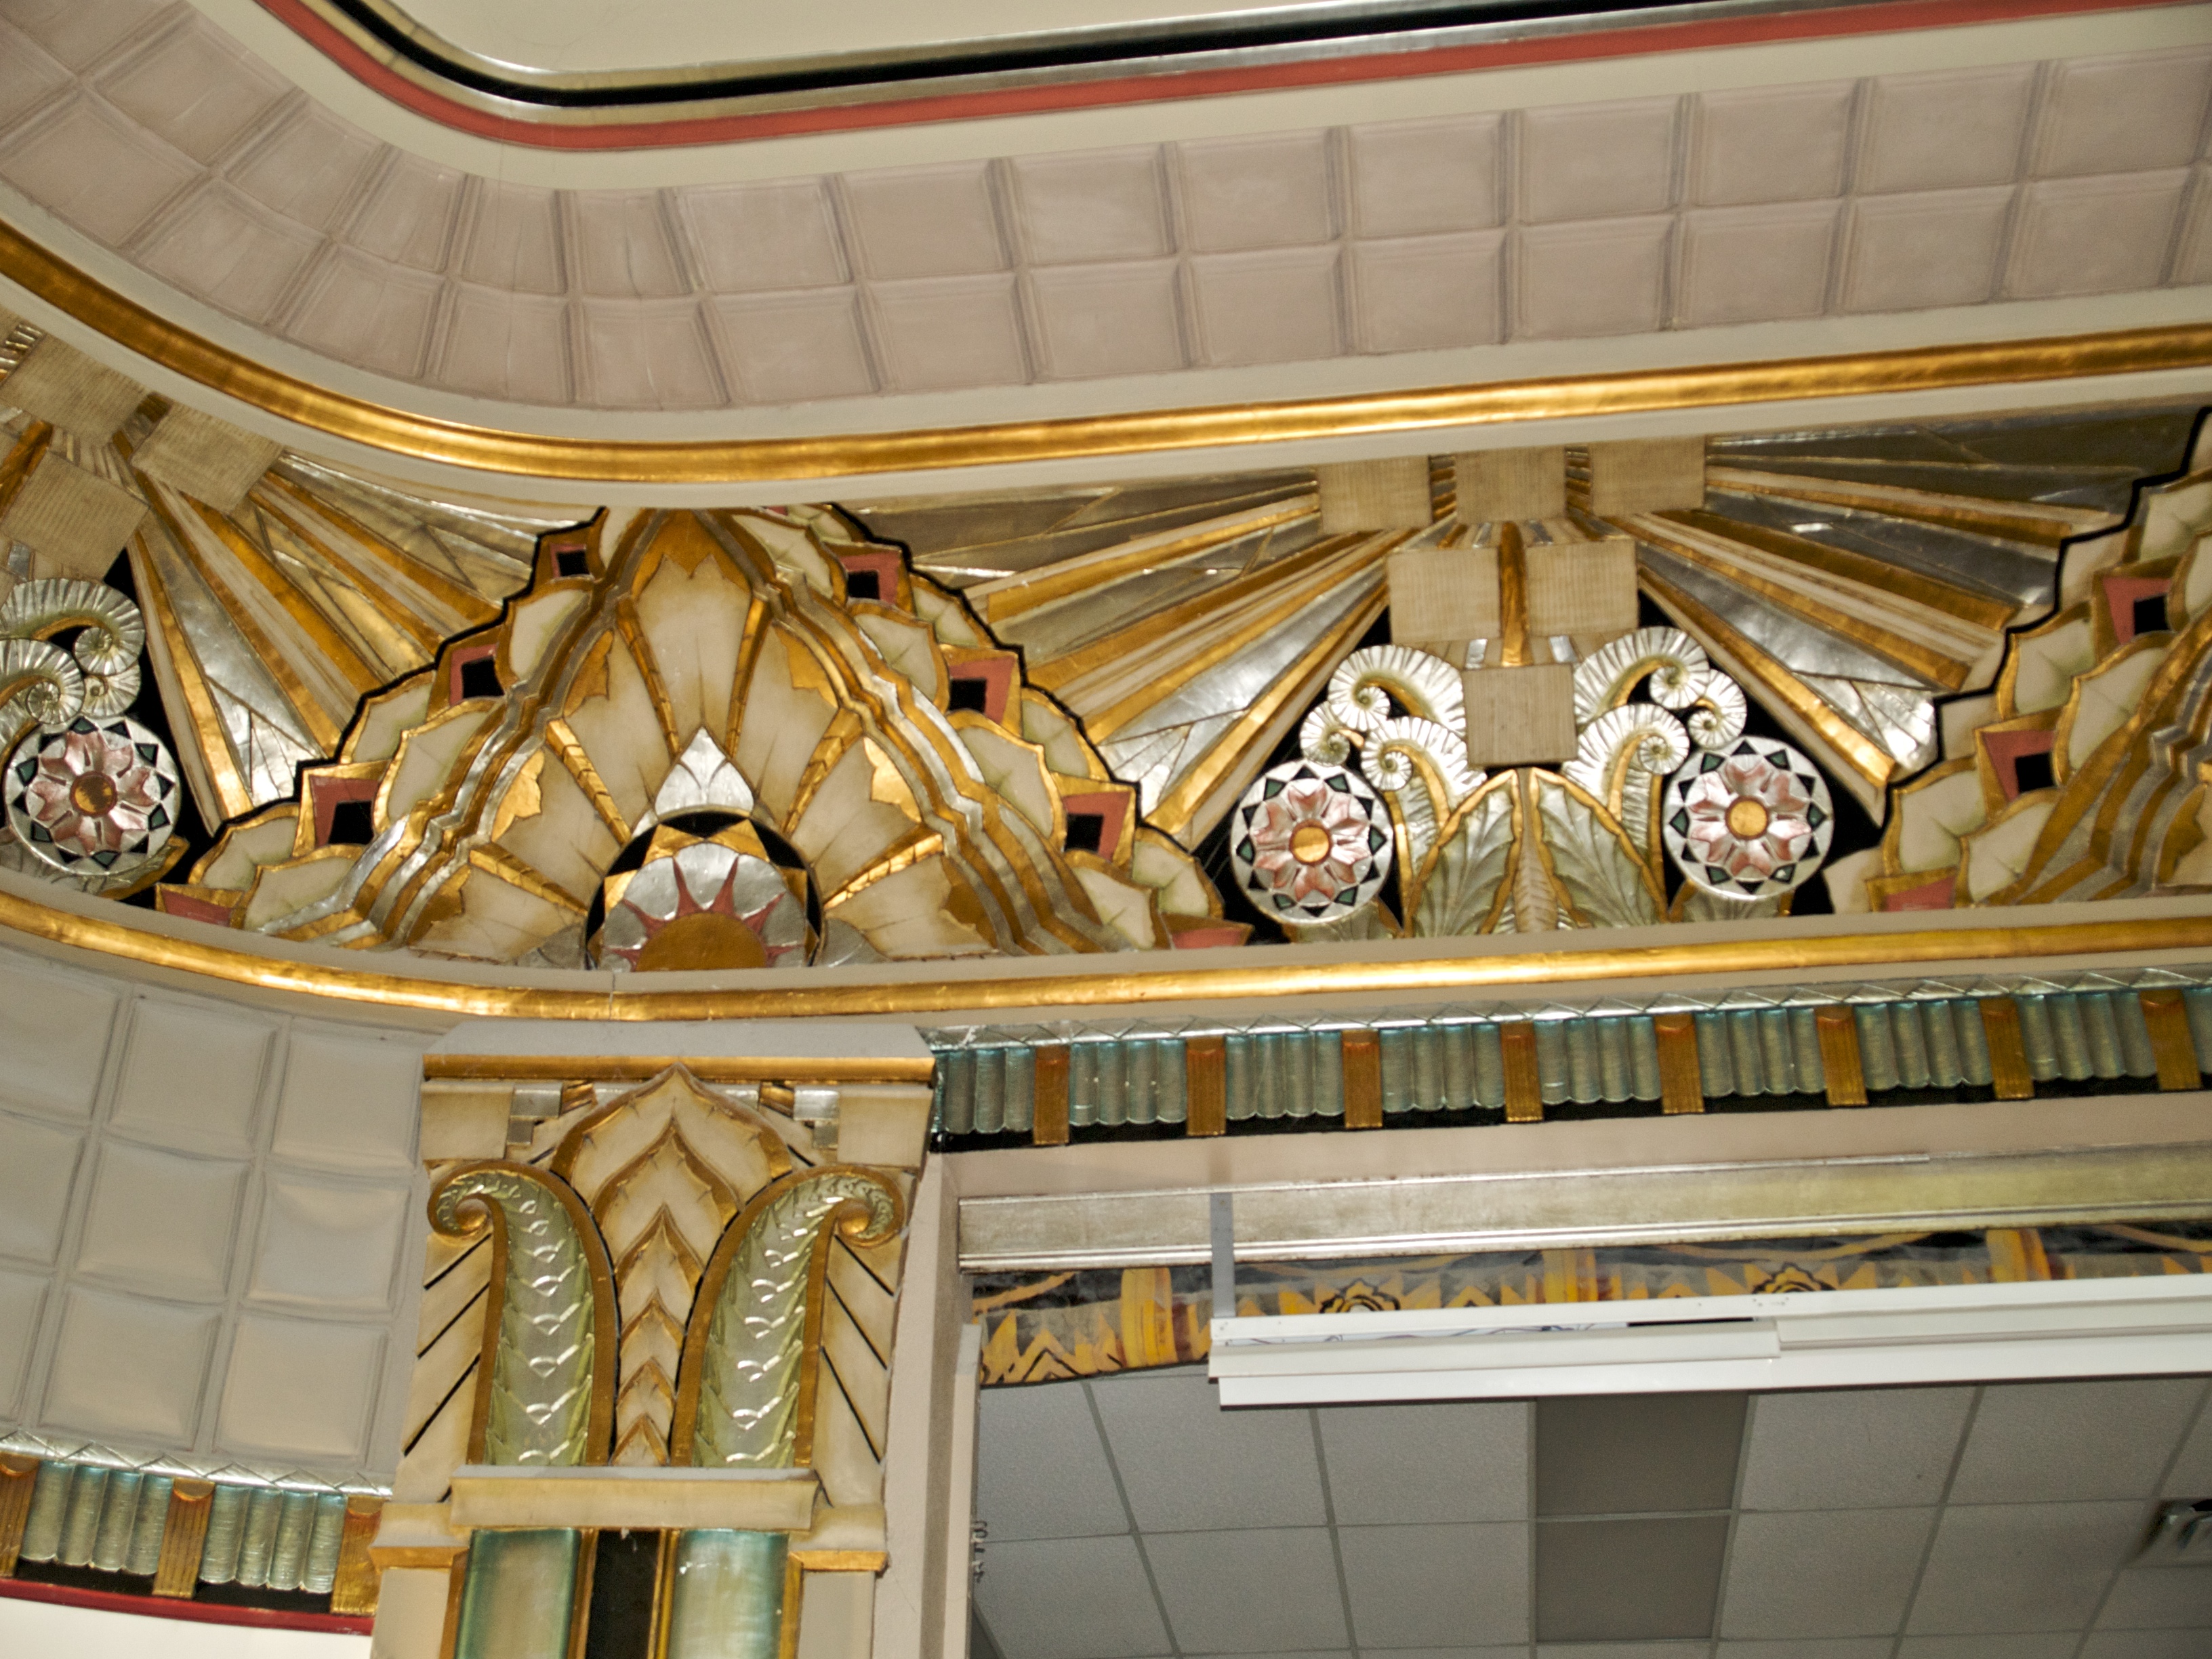 Ornate gold and silver leaf decorations in the ceiling of a building.